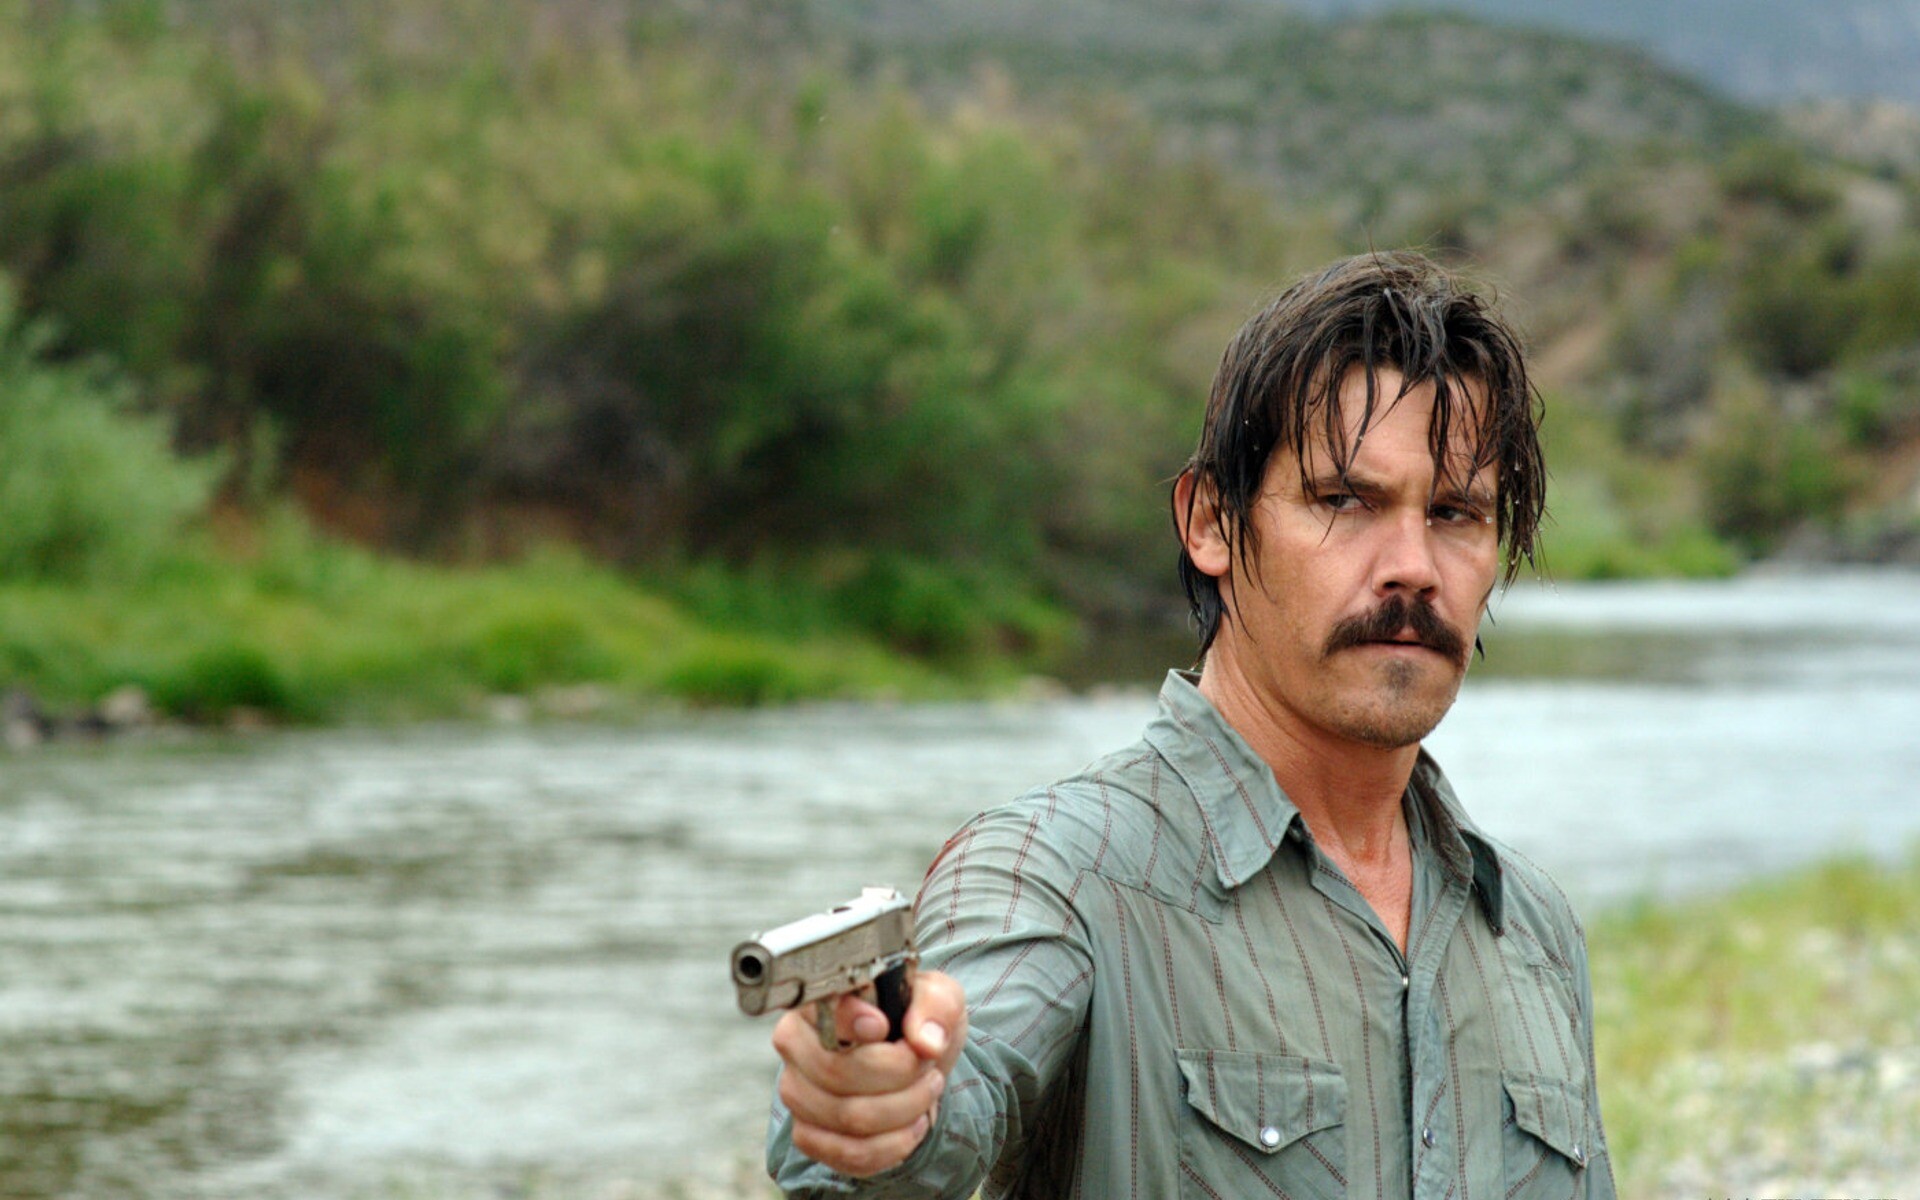 No Country For Old Men (Movie): Josh Brolin as Llewelyn Moss, A 2007 American neo-Western crime thriller film. 1920x1200 HD Wallpaper.